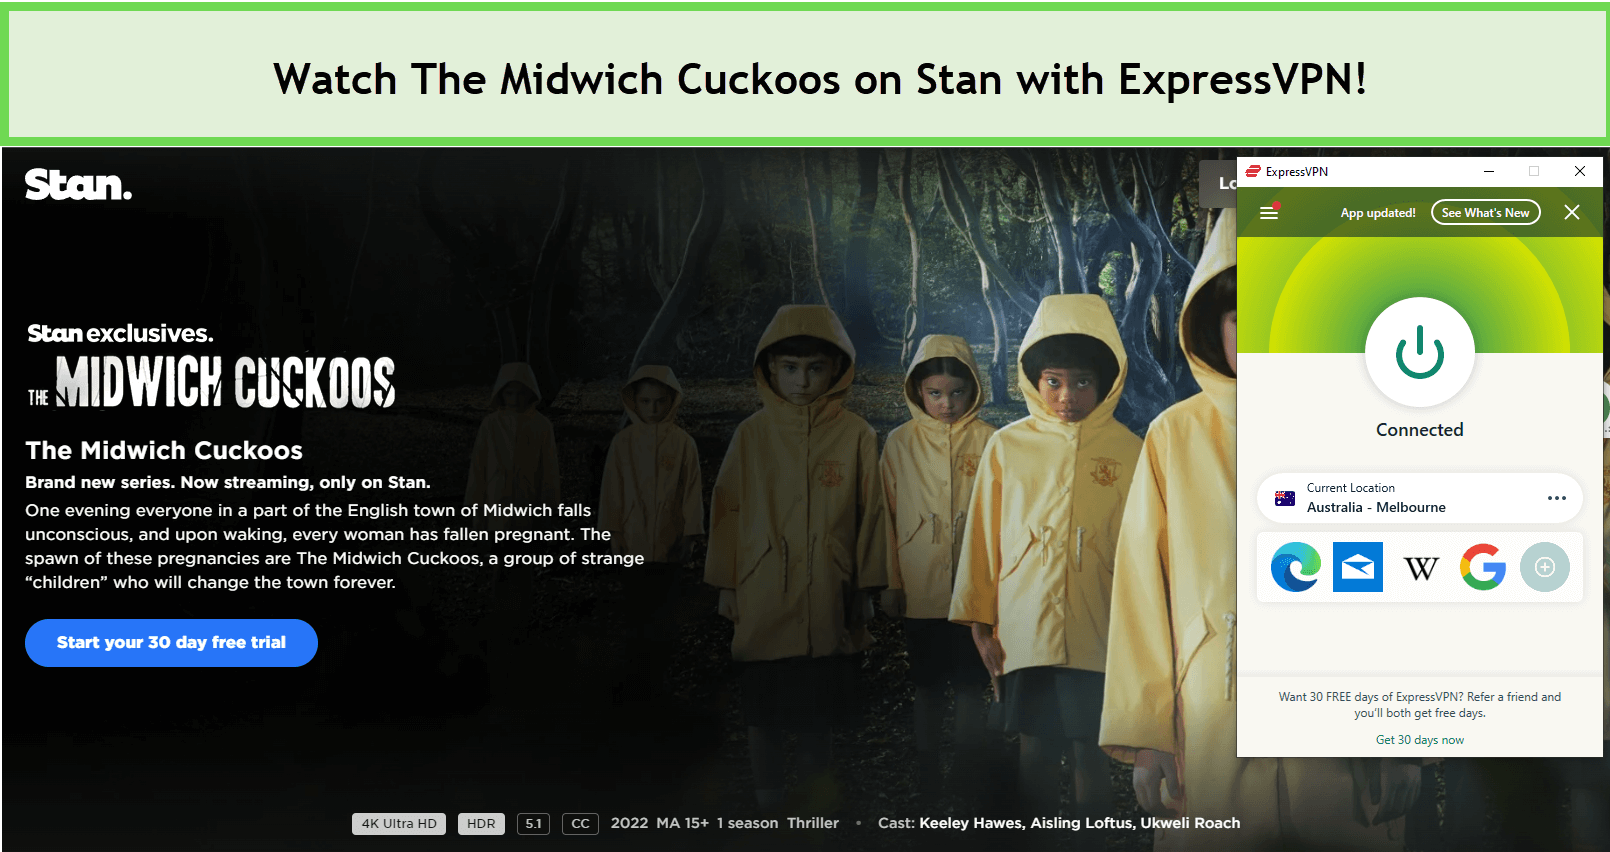 Watch-The-Midwich-Cuckoos-in-Singapore-on-Stan-with-ExpressVPN